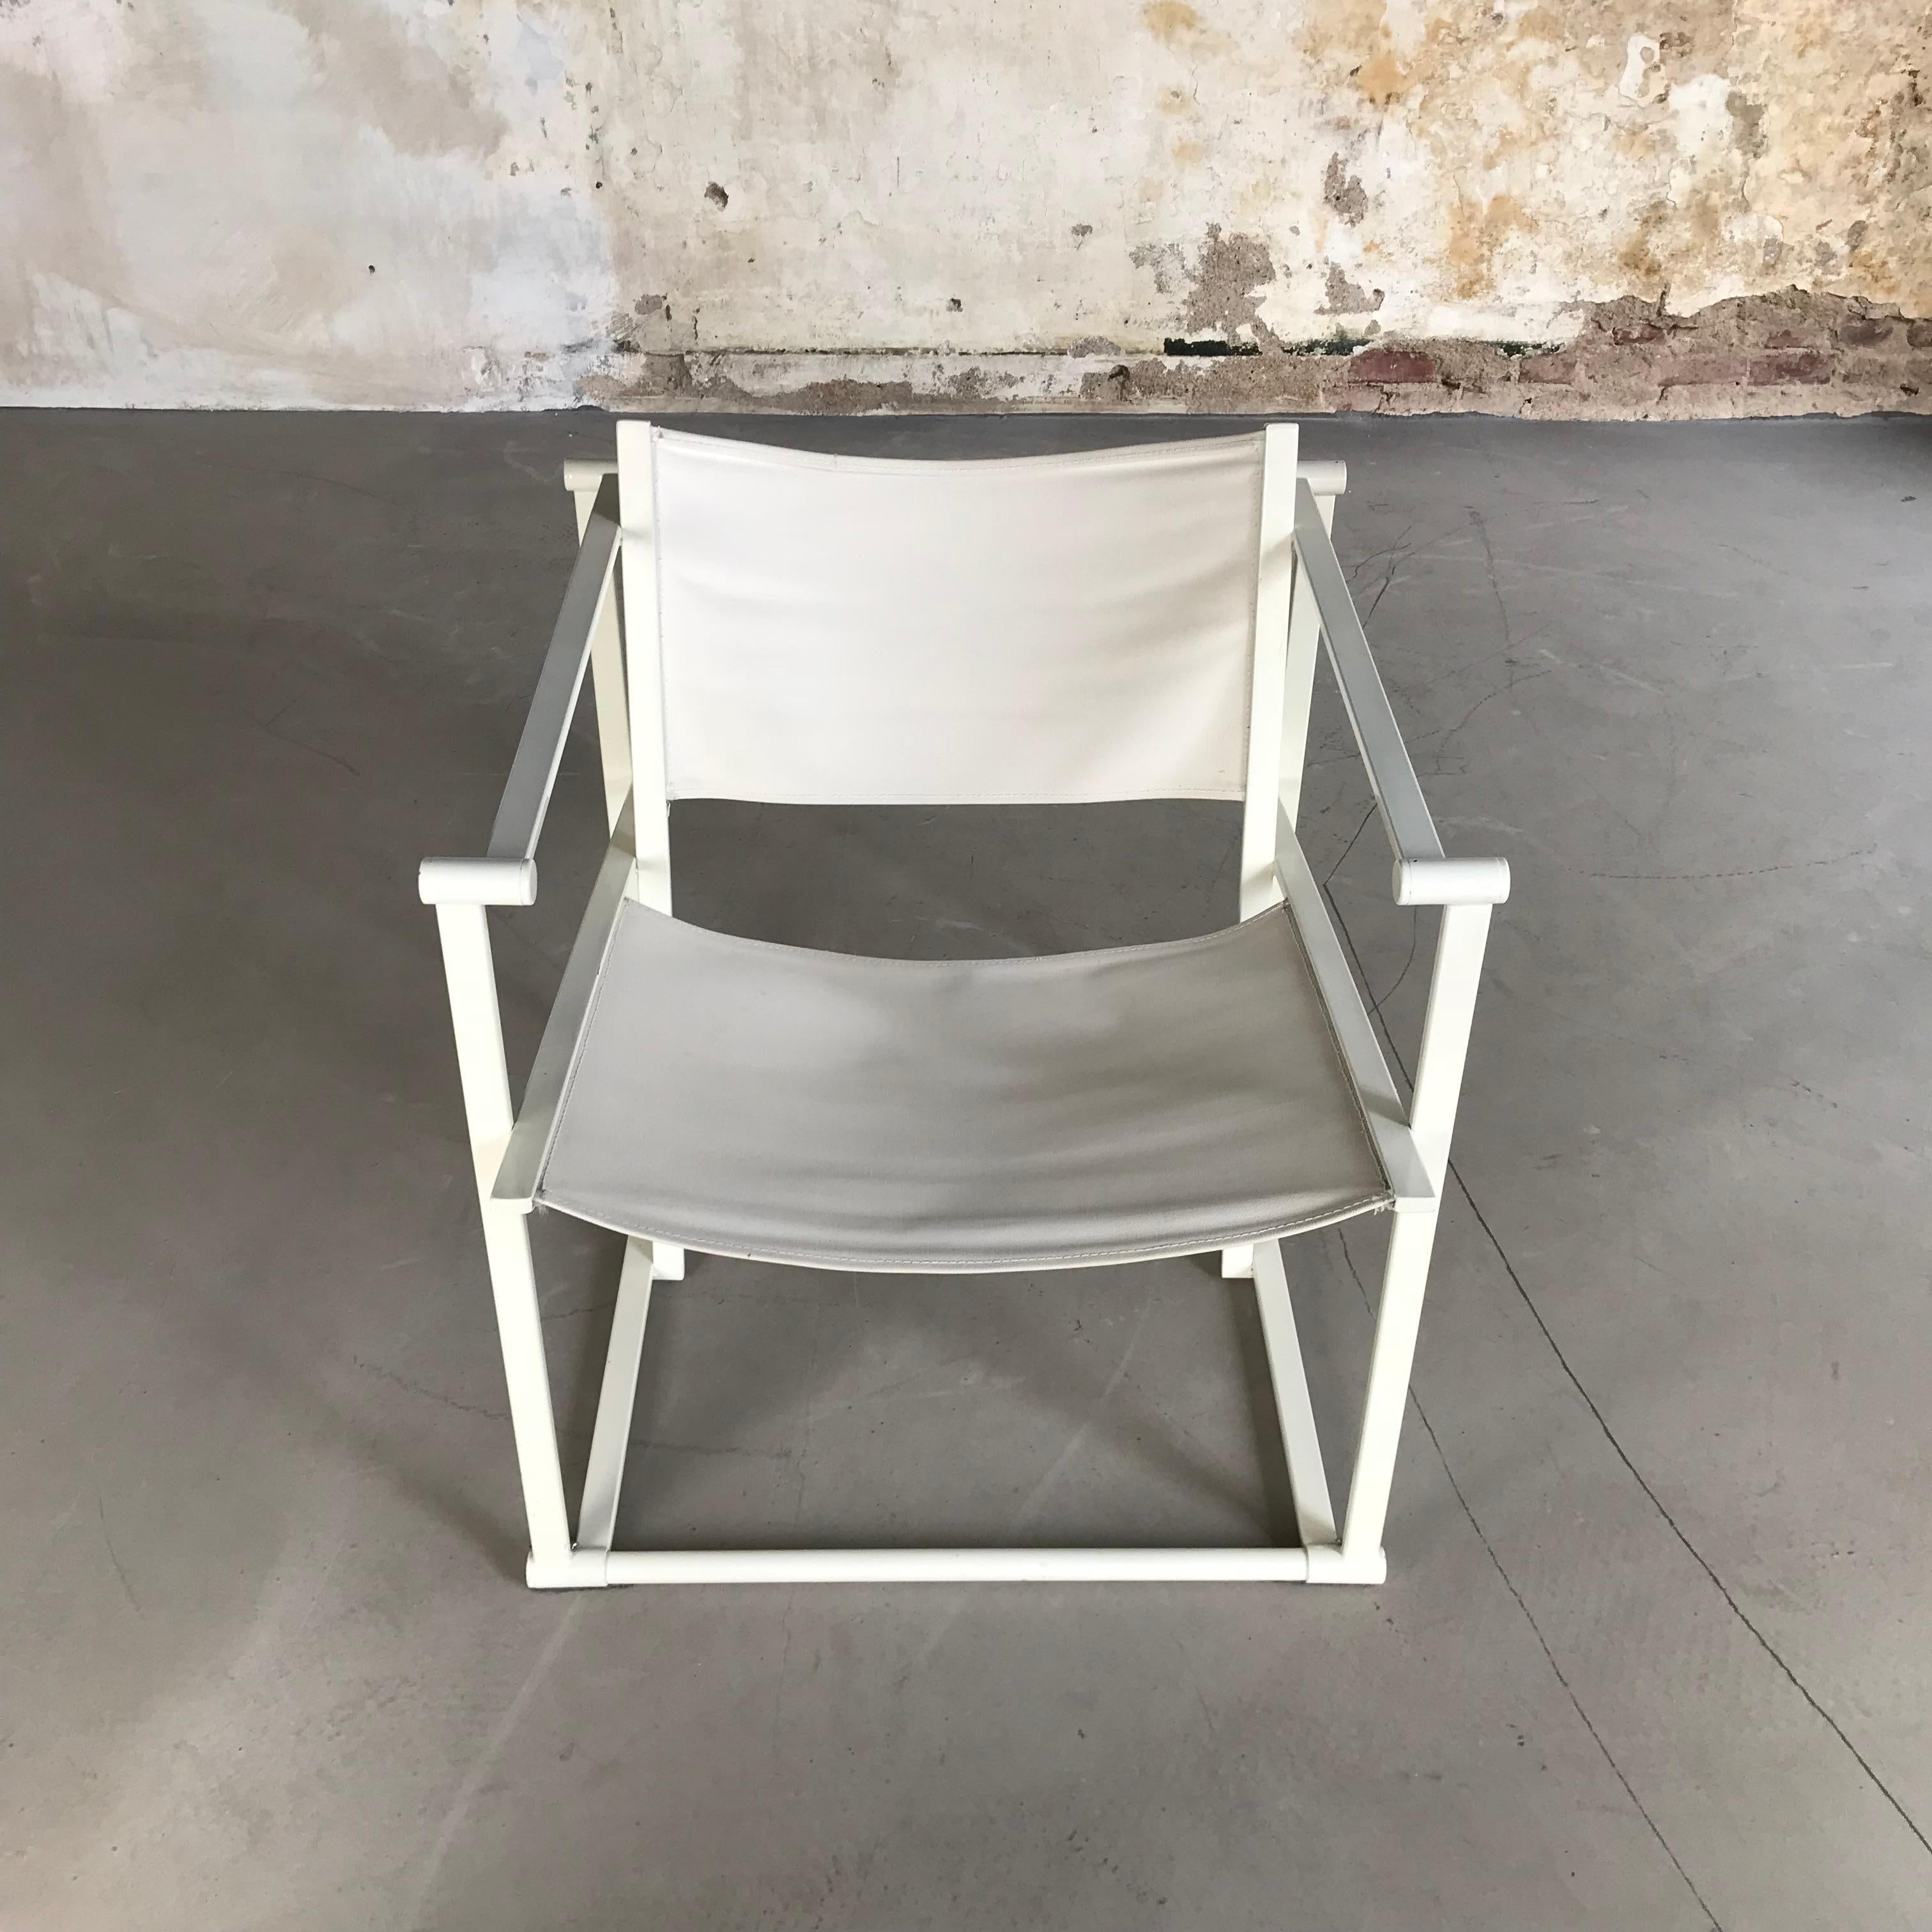 Pastoe cubic easychair FM61, designed by Radboud van Beekum in 1980.
A chair with clean lines and sharp design, consisting of a lacquered metal frame with a white back and seat in strong canvas.
In very good condition, very light little stains on